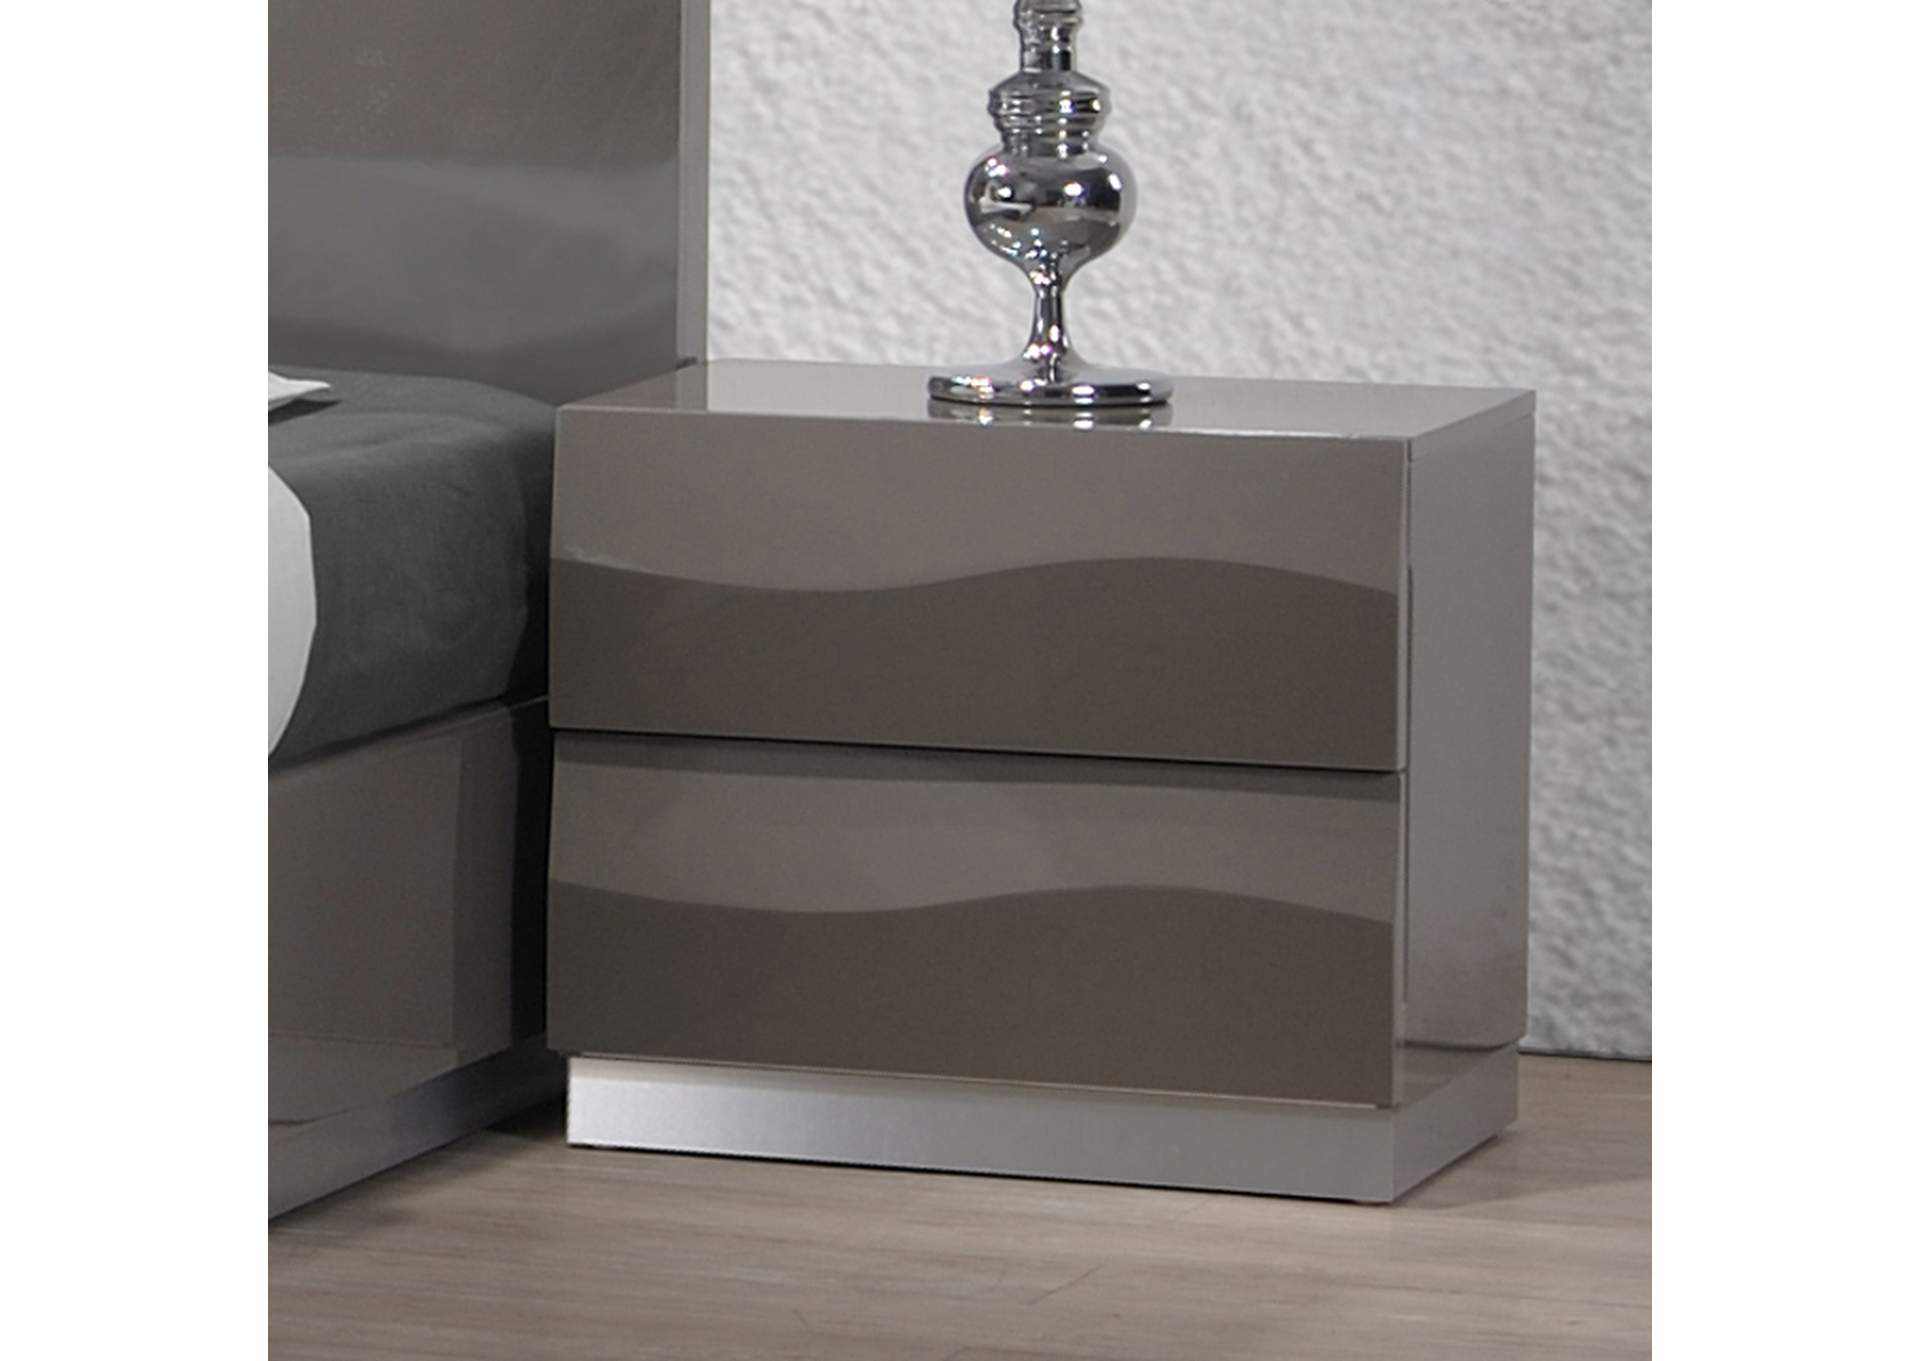 Delhi Gloss Gray Contemporary High Gloss 2-Drawer Nightstand,Chintaly Imports